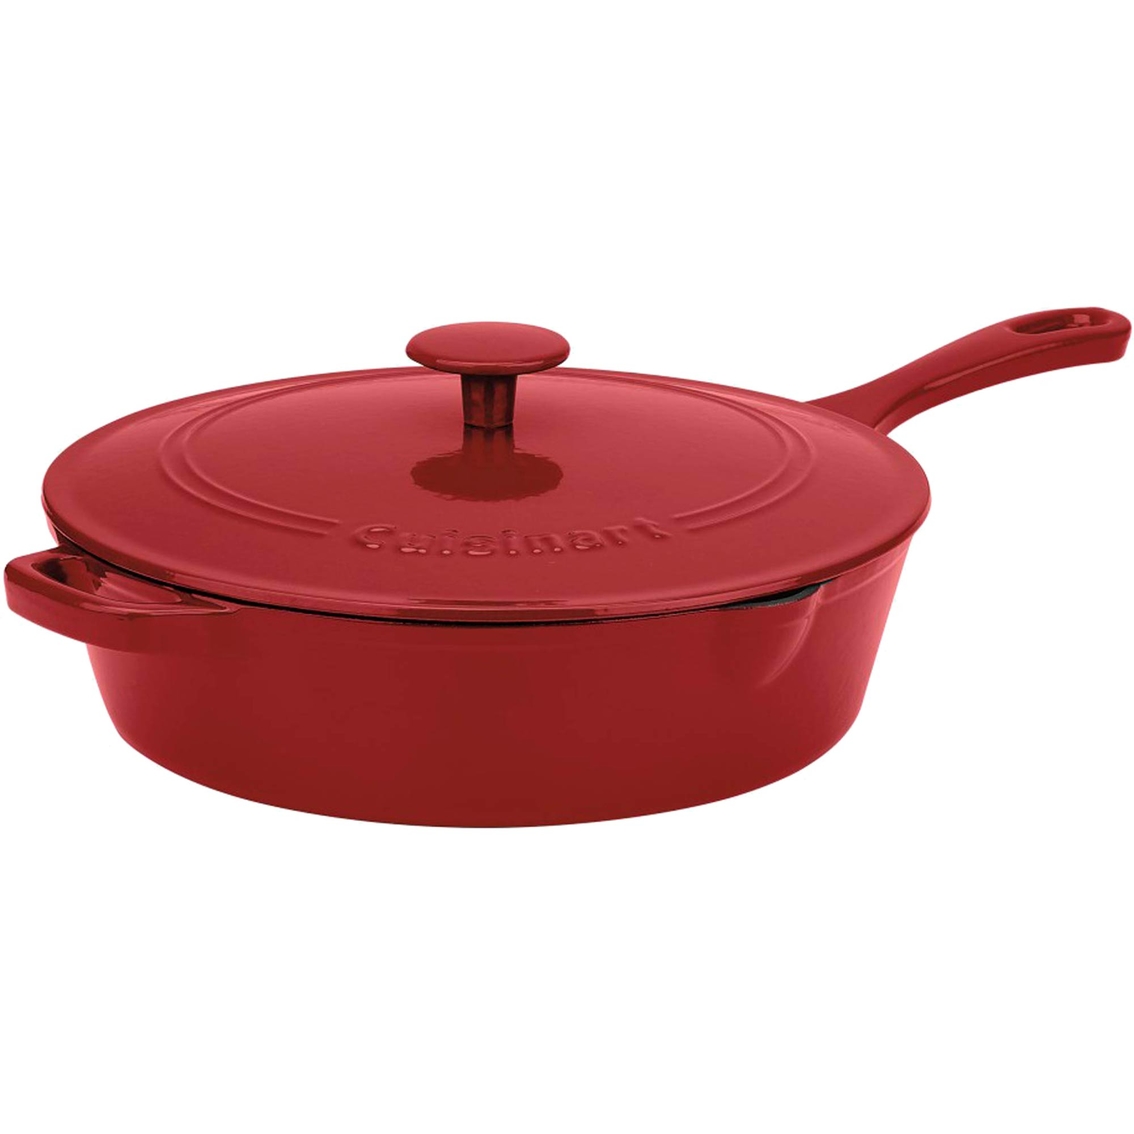 Cuisinart Chef's Classic Enameled Cast Iron Chicken Fryer In Cardinal, 4.5  Qt., Fry Pans & Skillets, Household